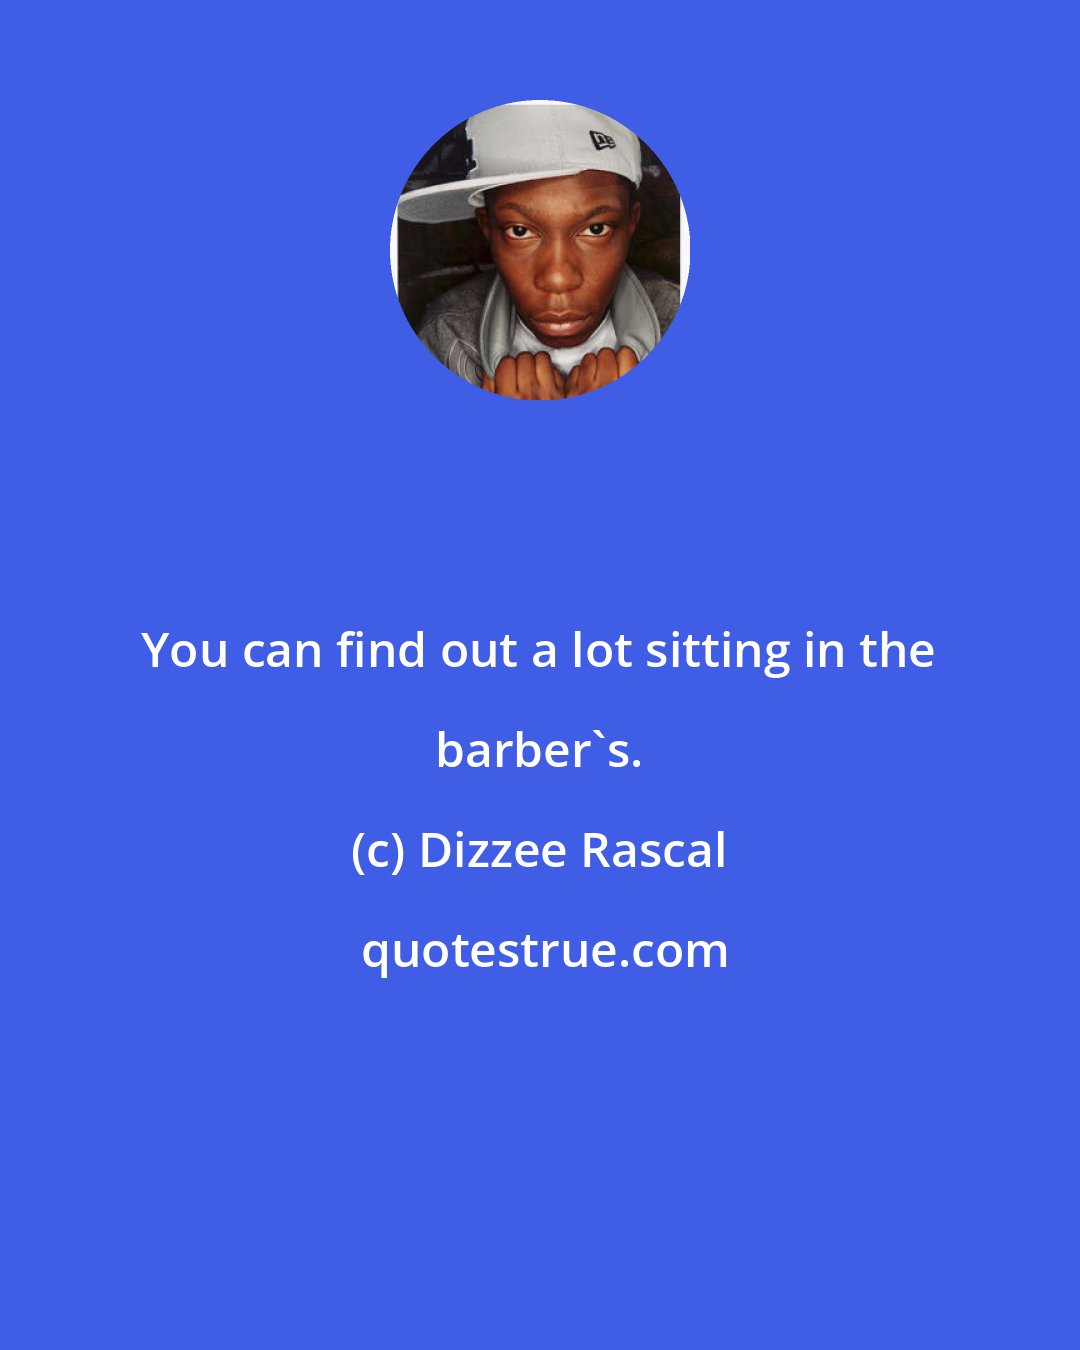 Dizzee Rascal: You can find out a lot sitting in the barber's.